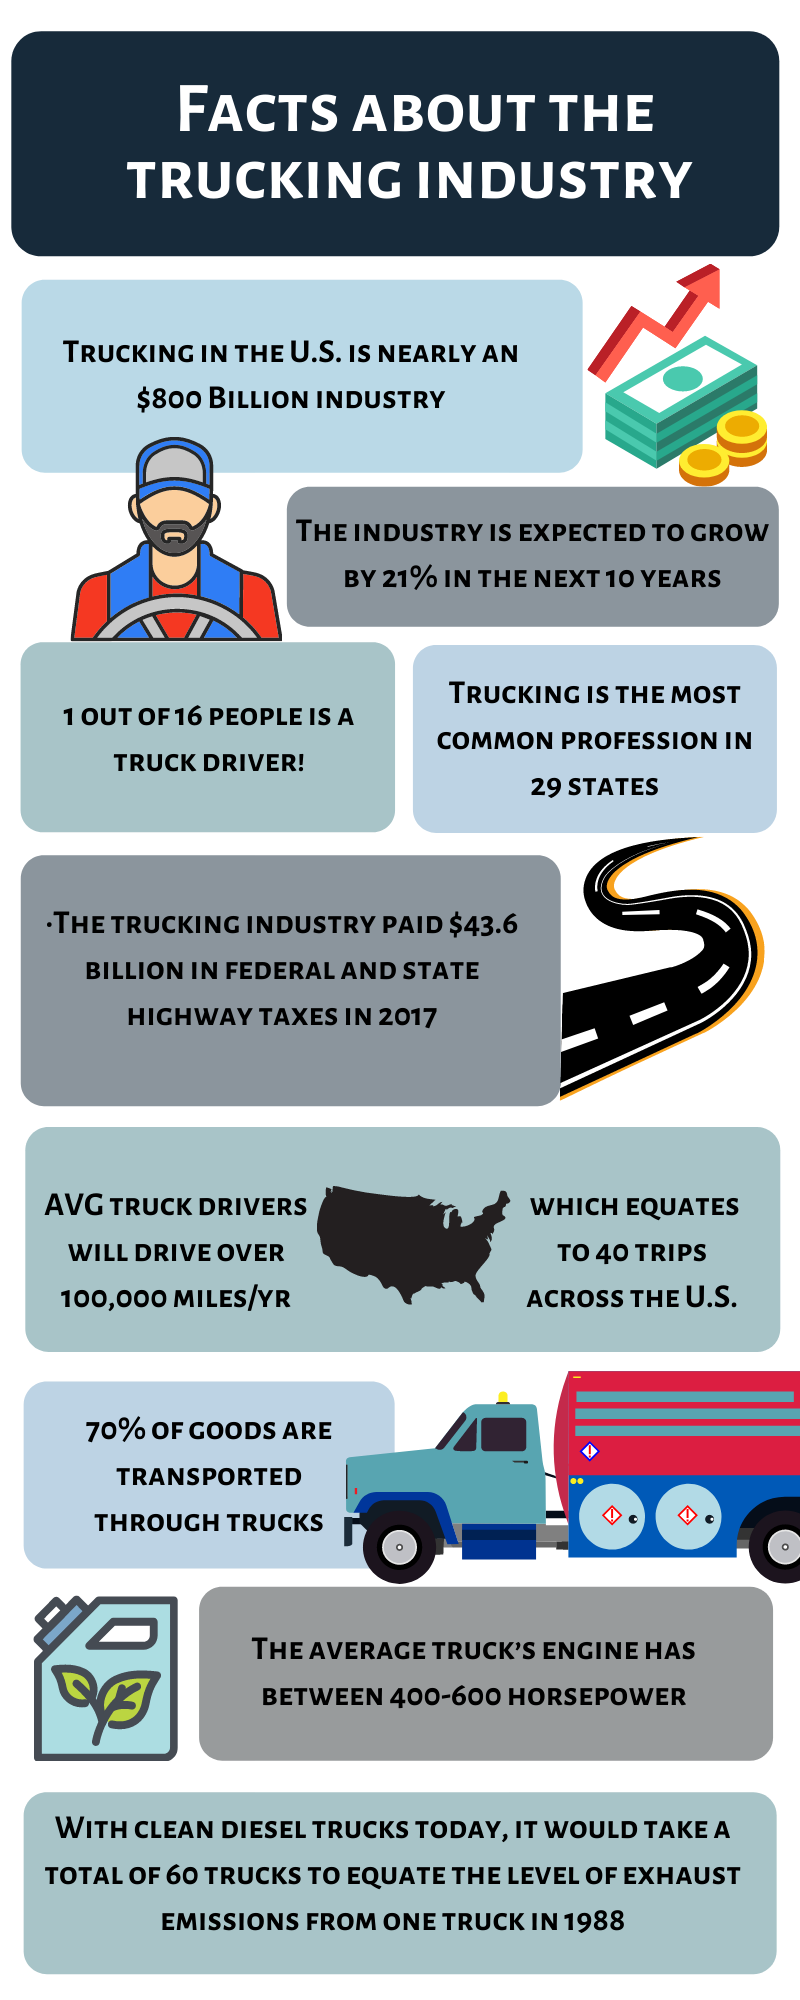 Facts about the trucking industry